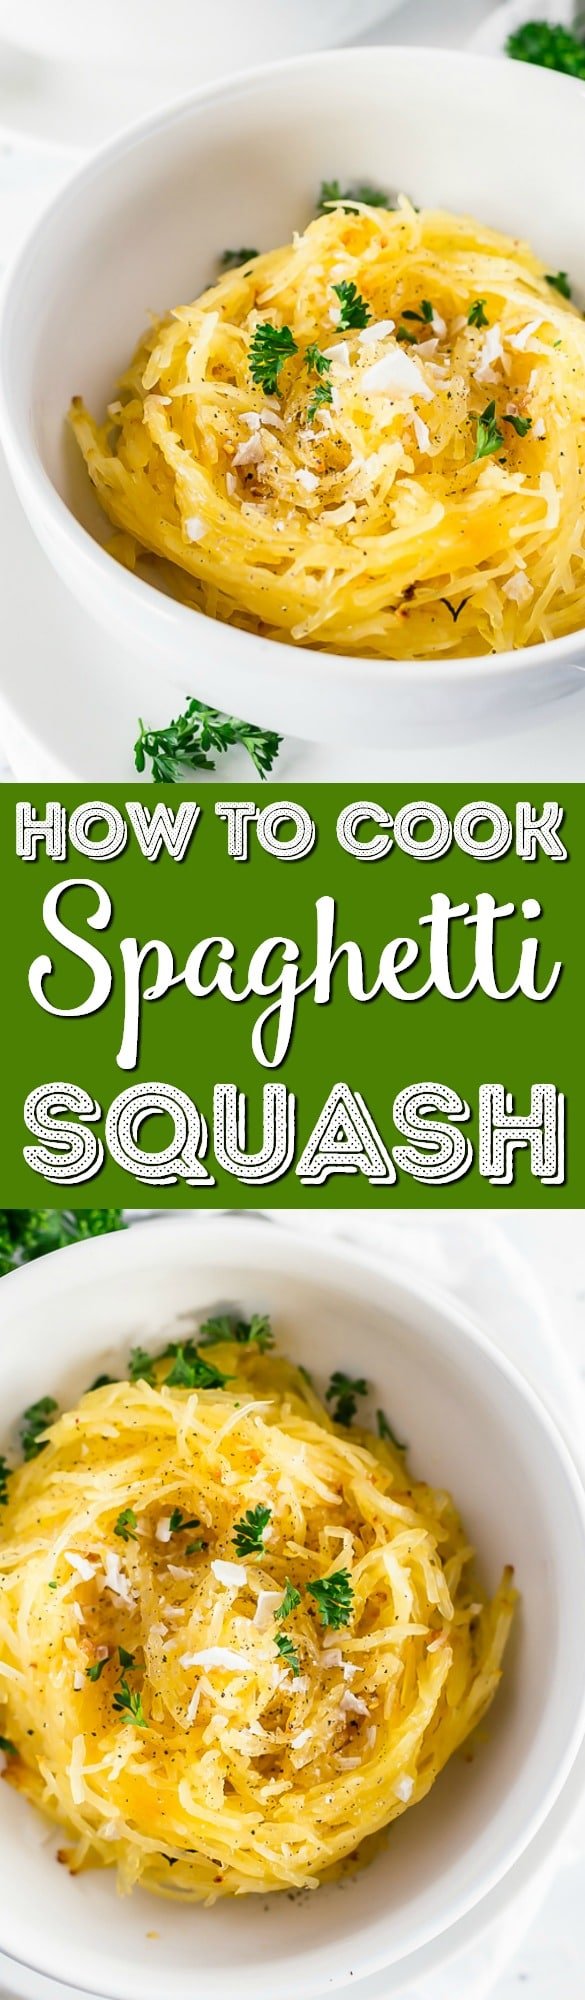 How To Cook Spaghetti Squash In The Oven | Sugar & Soul